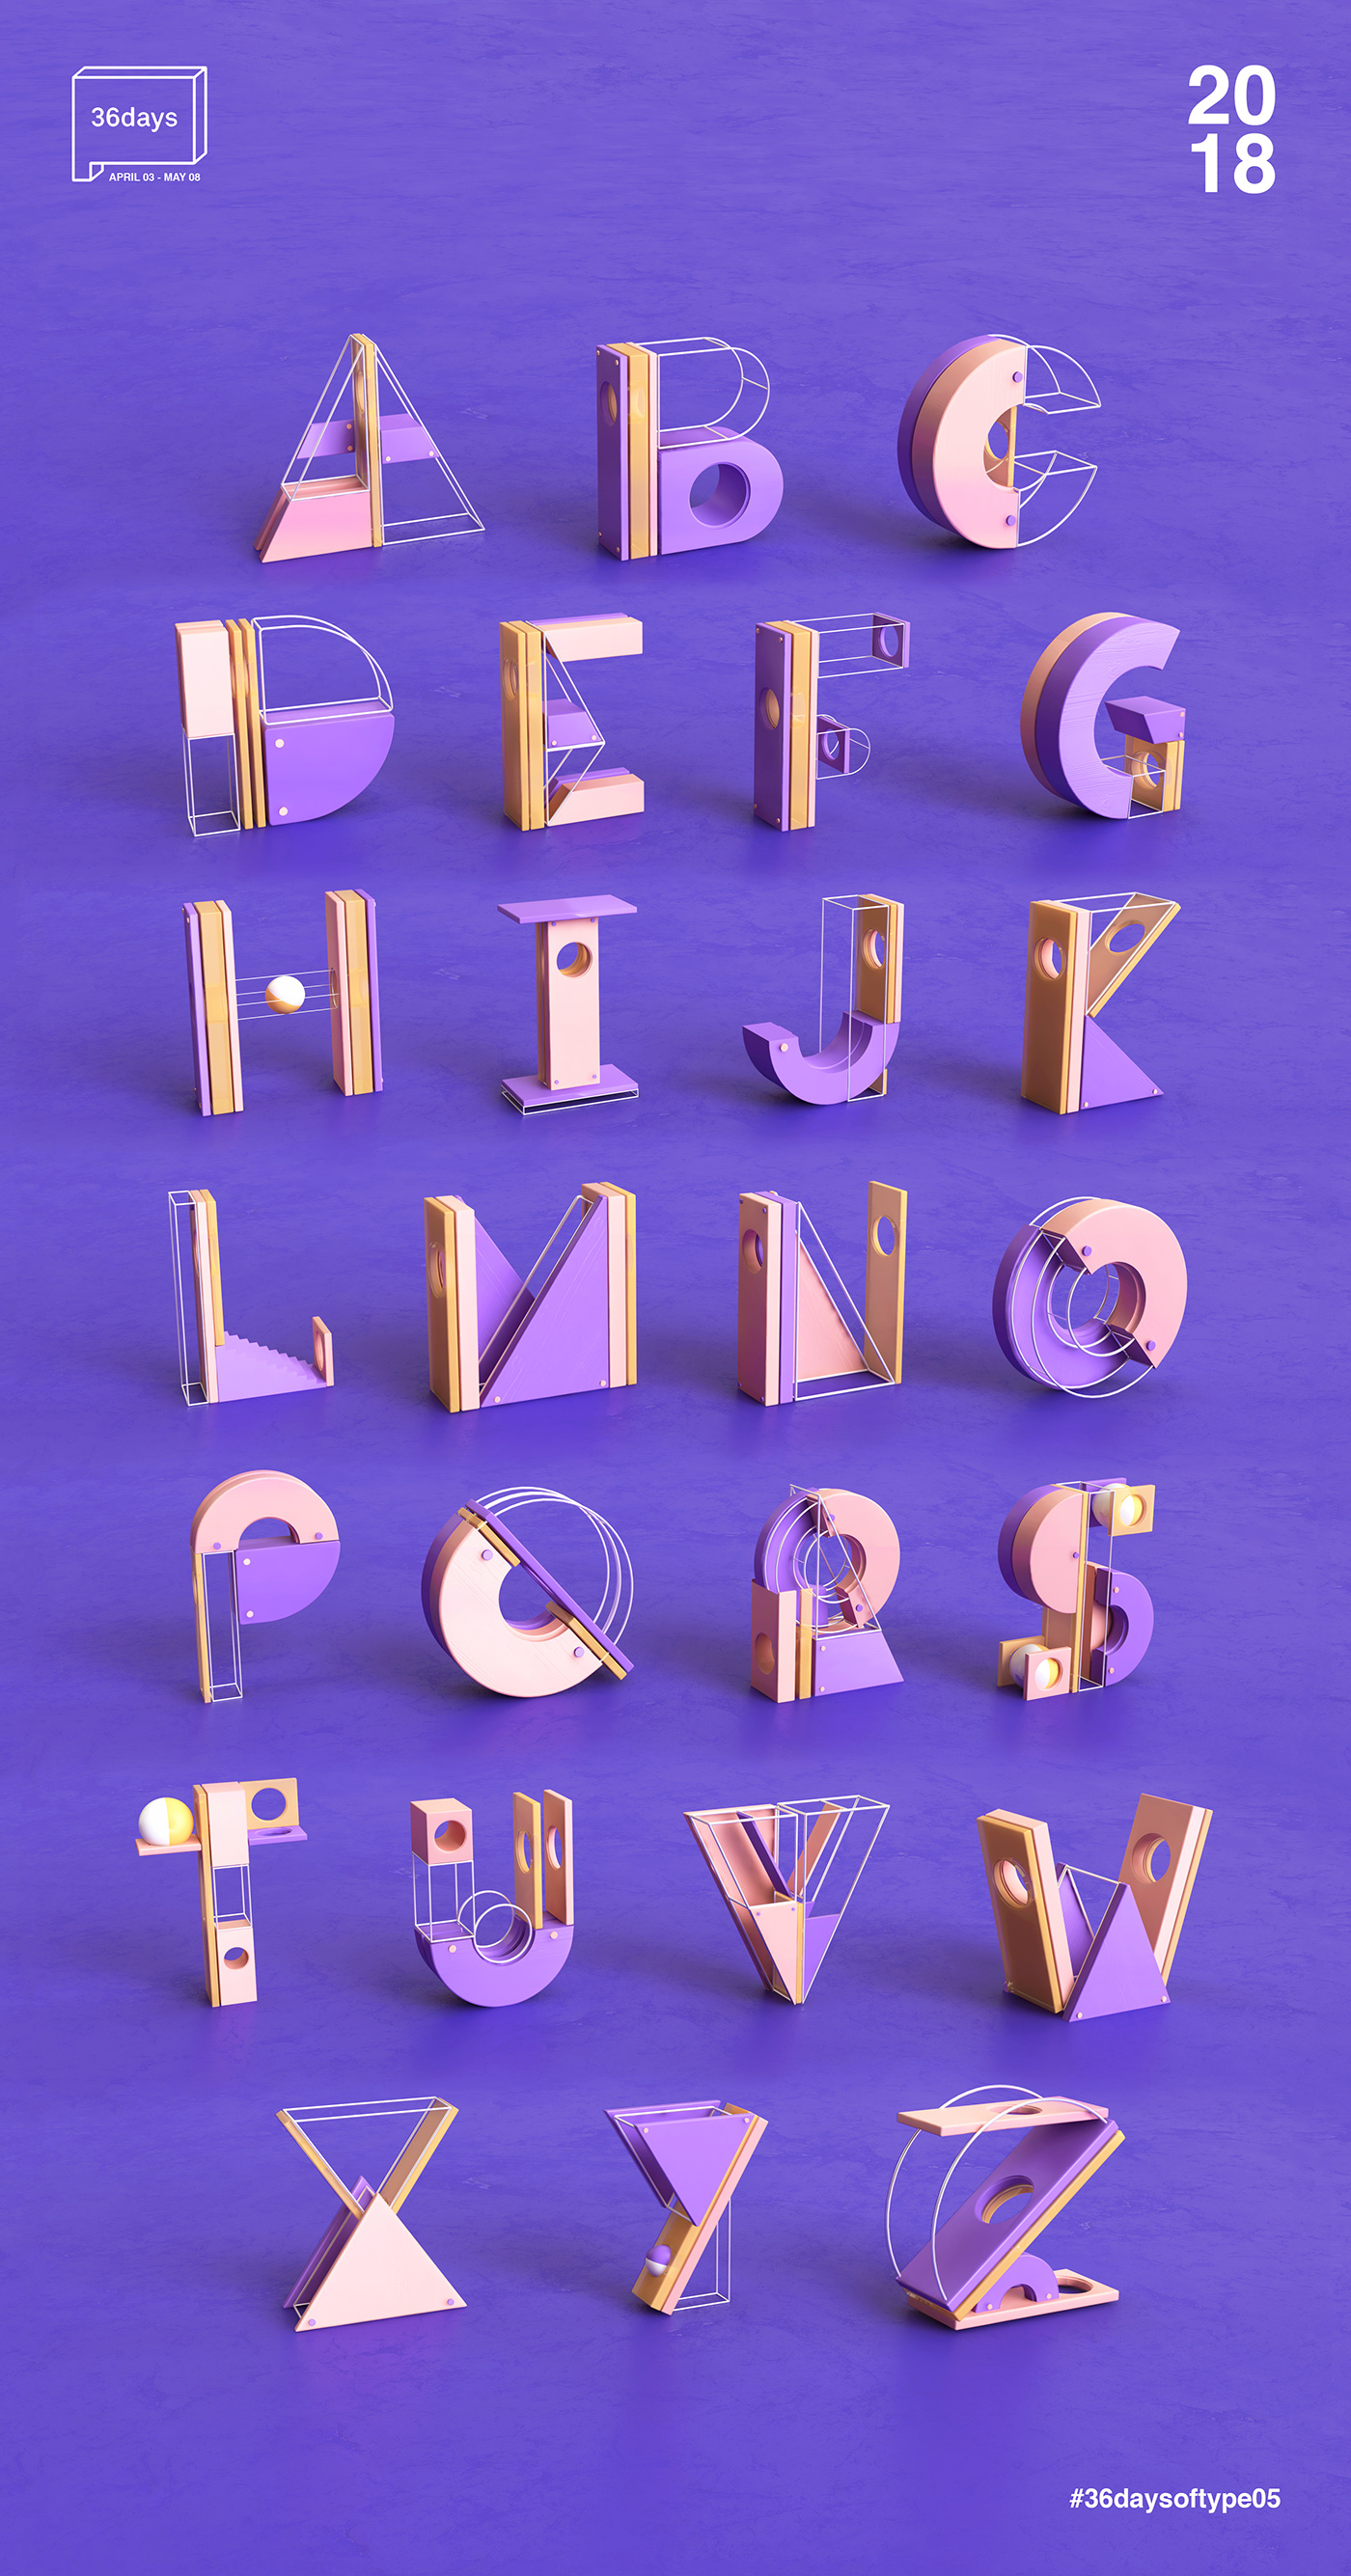 36daysoftype 3D type letters numbers shapes typography   design alphabet cinema 4d